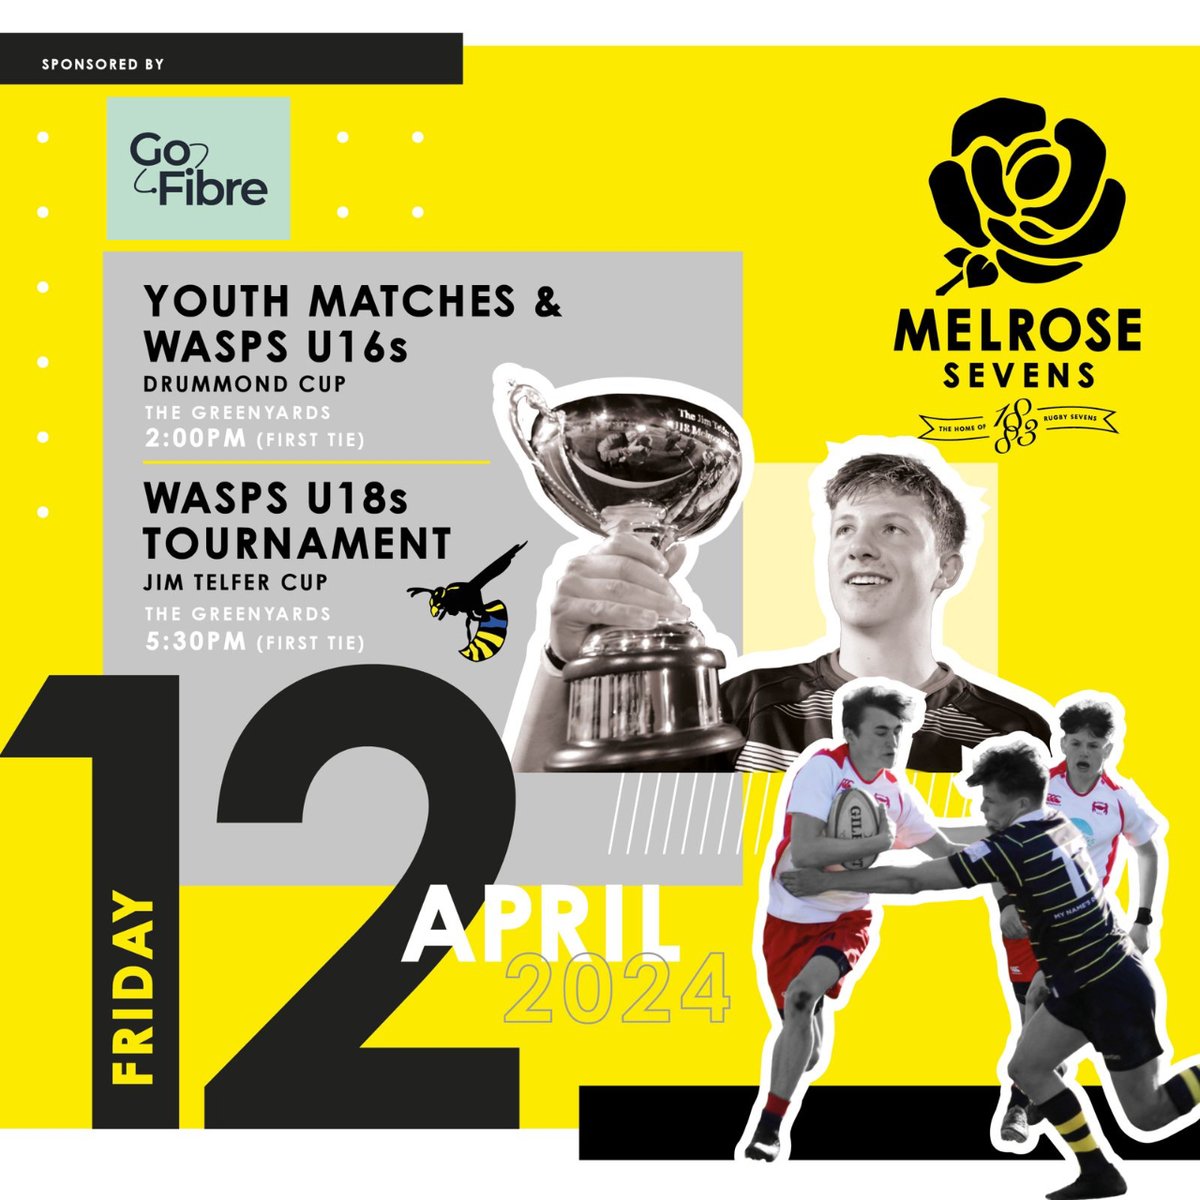 Pop along to the Greenyards today and watch the future stars take to the pitch! ⭐ Tickets are available on the gate. #melrosesevens2024 #youthrugby #homeofsevens #eventsintheborders #eventsinscotland #scottishborders #homeofrugbysevens #scottishbordersevents #scottishrugby